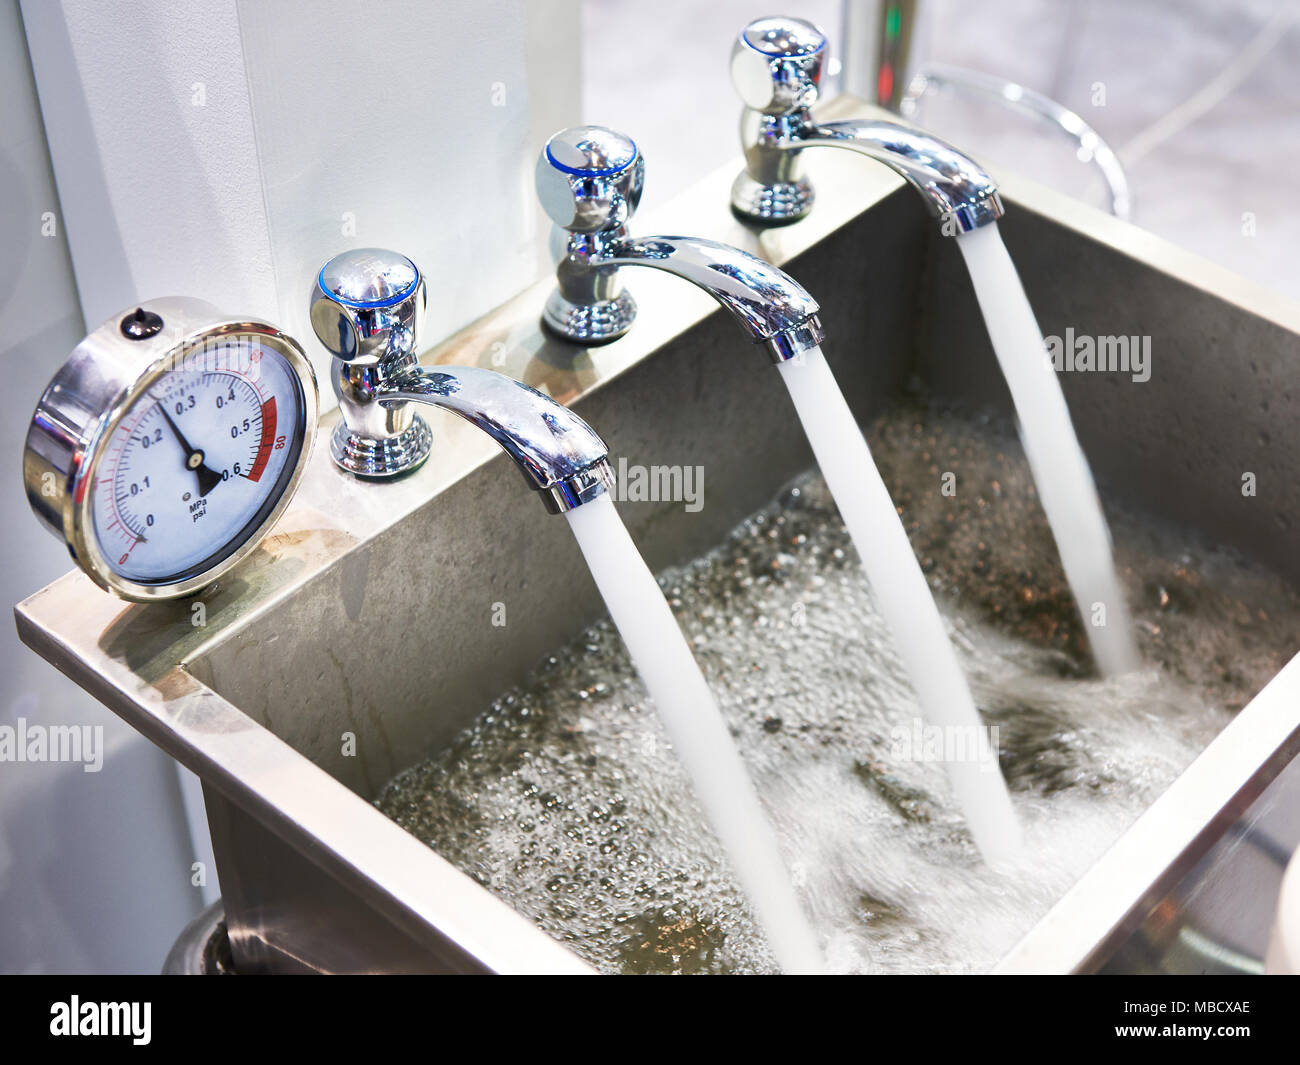 Metal sink with three taps and a manometer Stock Photo